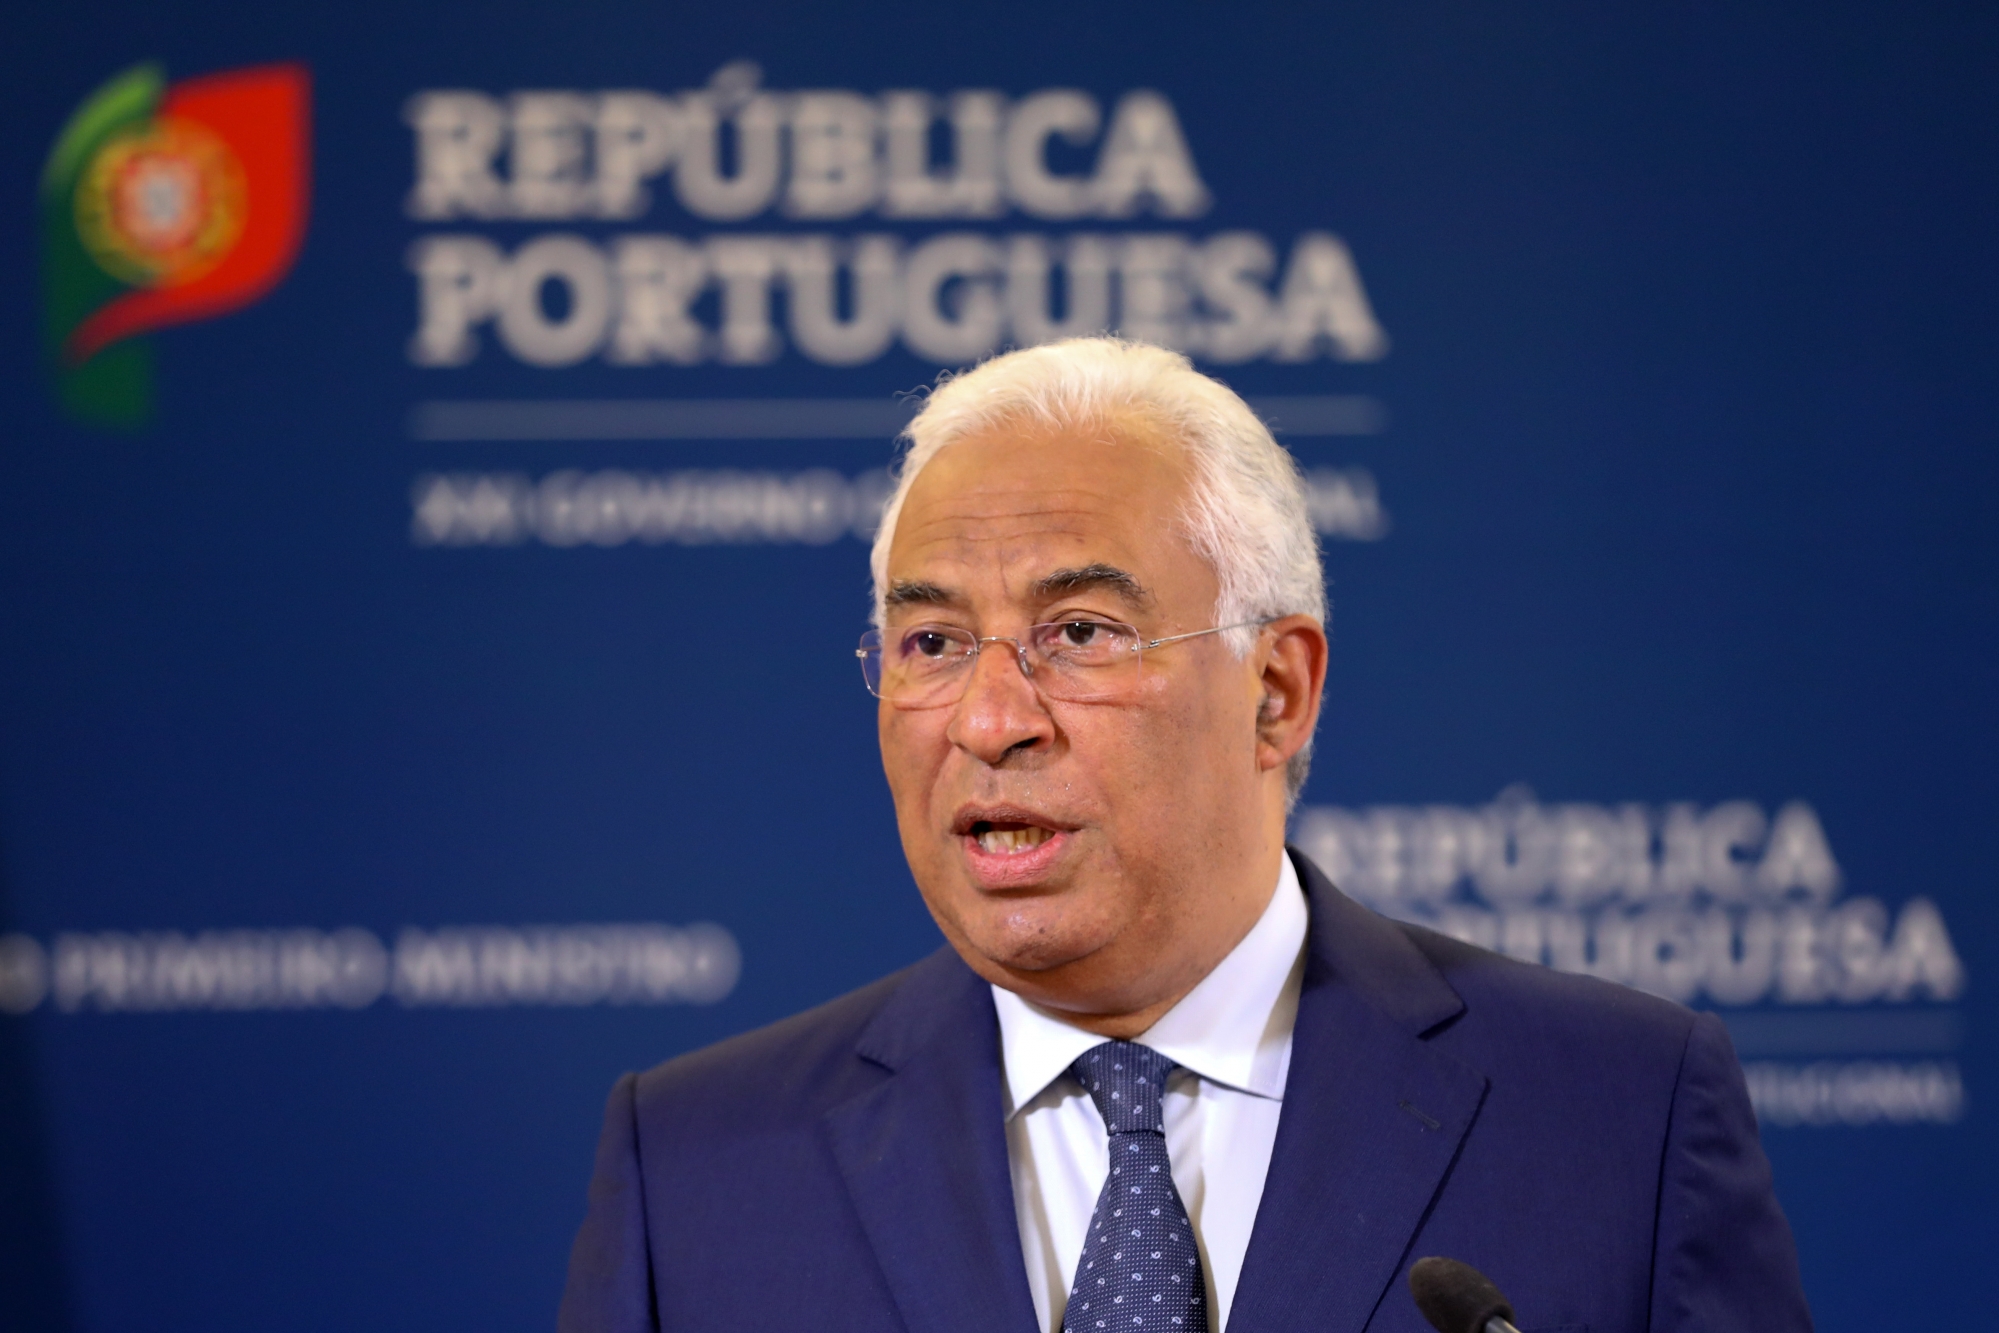 epa07545114 Portugal's Prime Minister Antonio Costa makes an announcement to the country after meeting with the President in Lisbon, Portugal, 03 May 2019. Costa informed that the government will resign if the full accounting of teachers' length of service is approved in a final overall vote.  EPA/JOAO RELVAS PORTUGAL GOVERNMENT TEACHERS